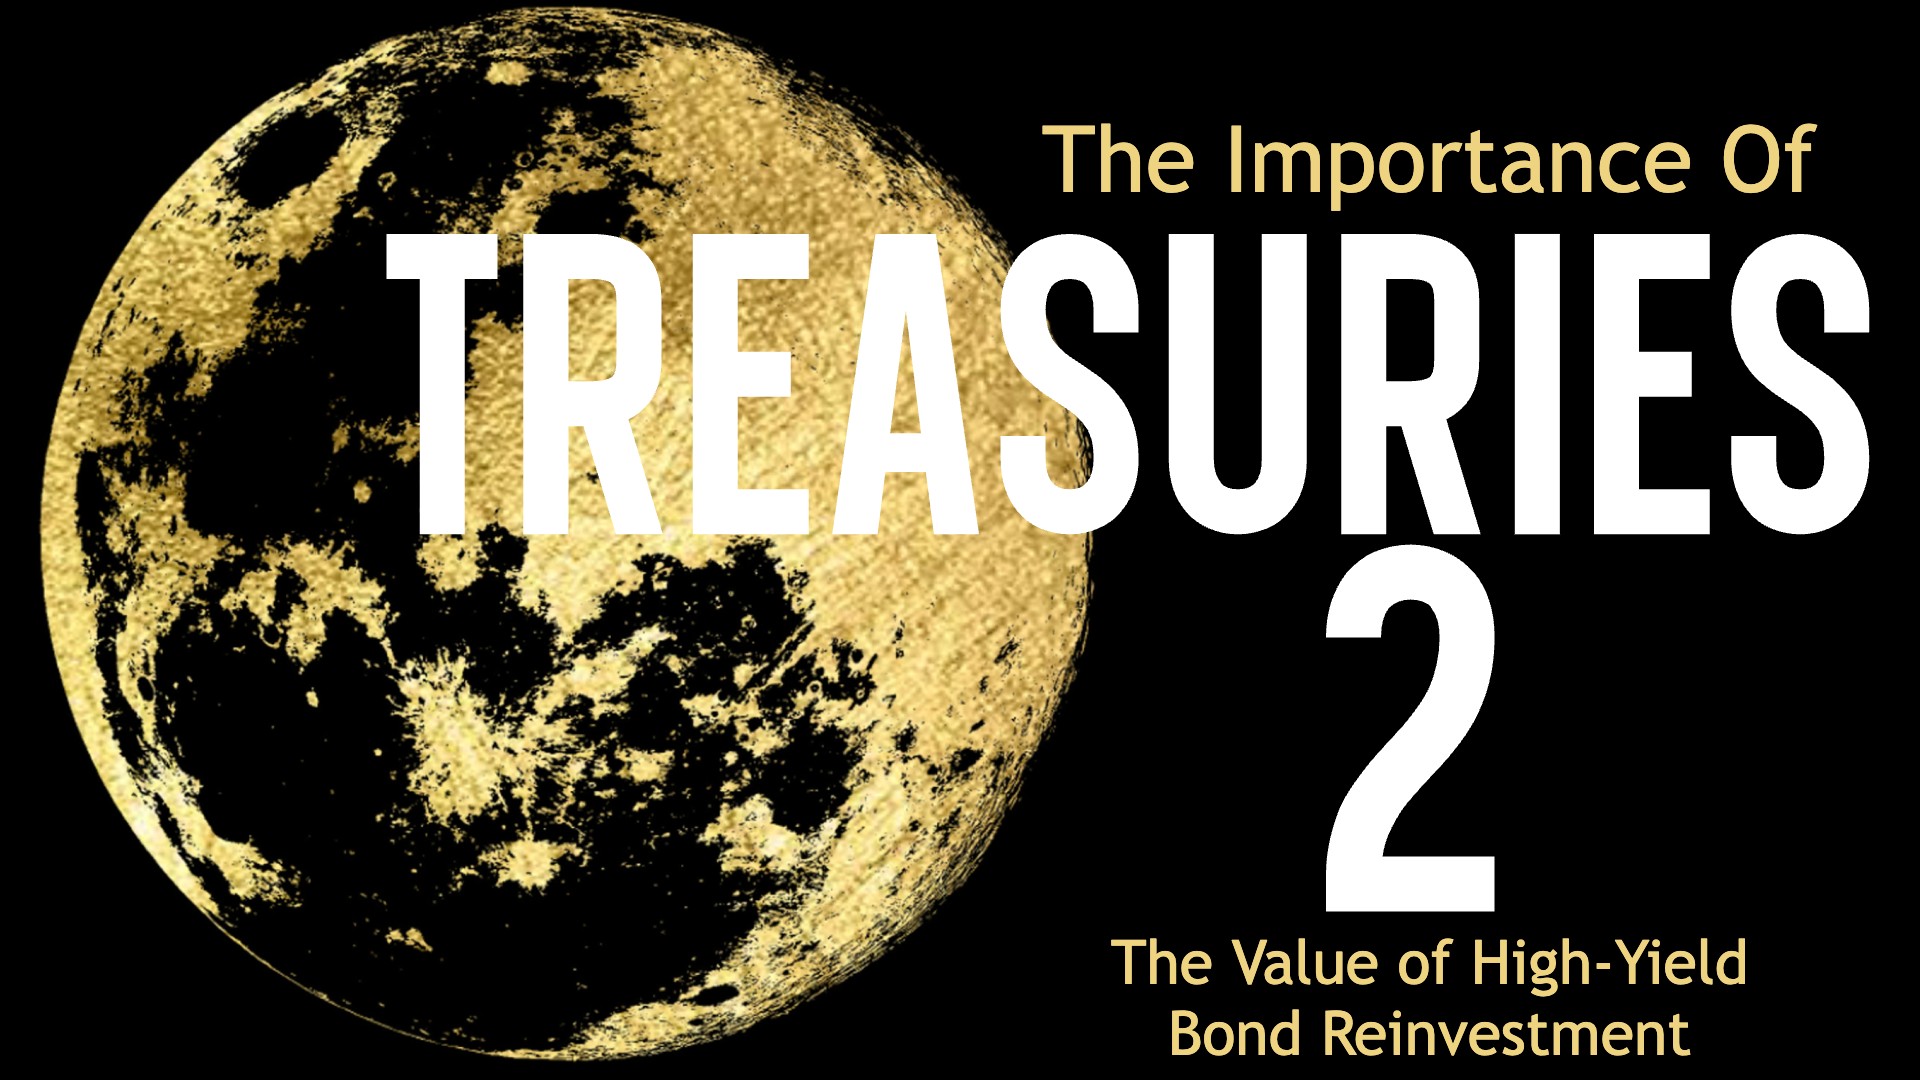 The Importance of Treasuries 2: The Value of High-Yield Bond Reinvestment